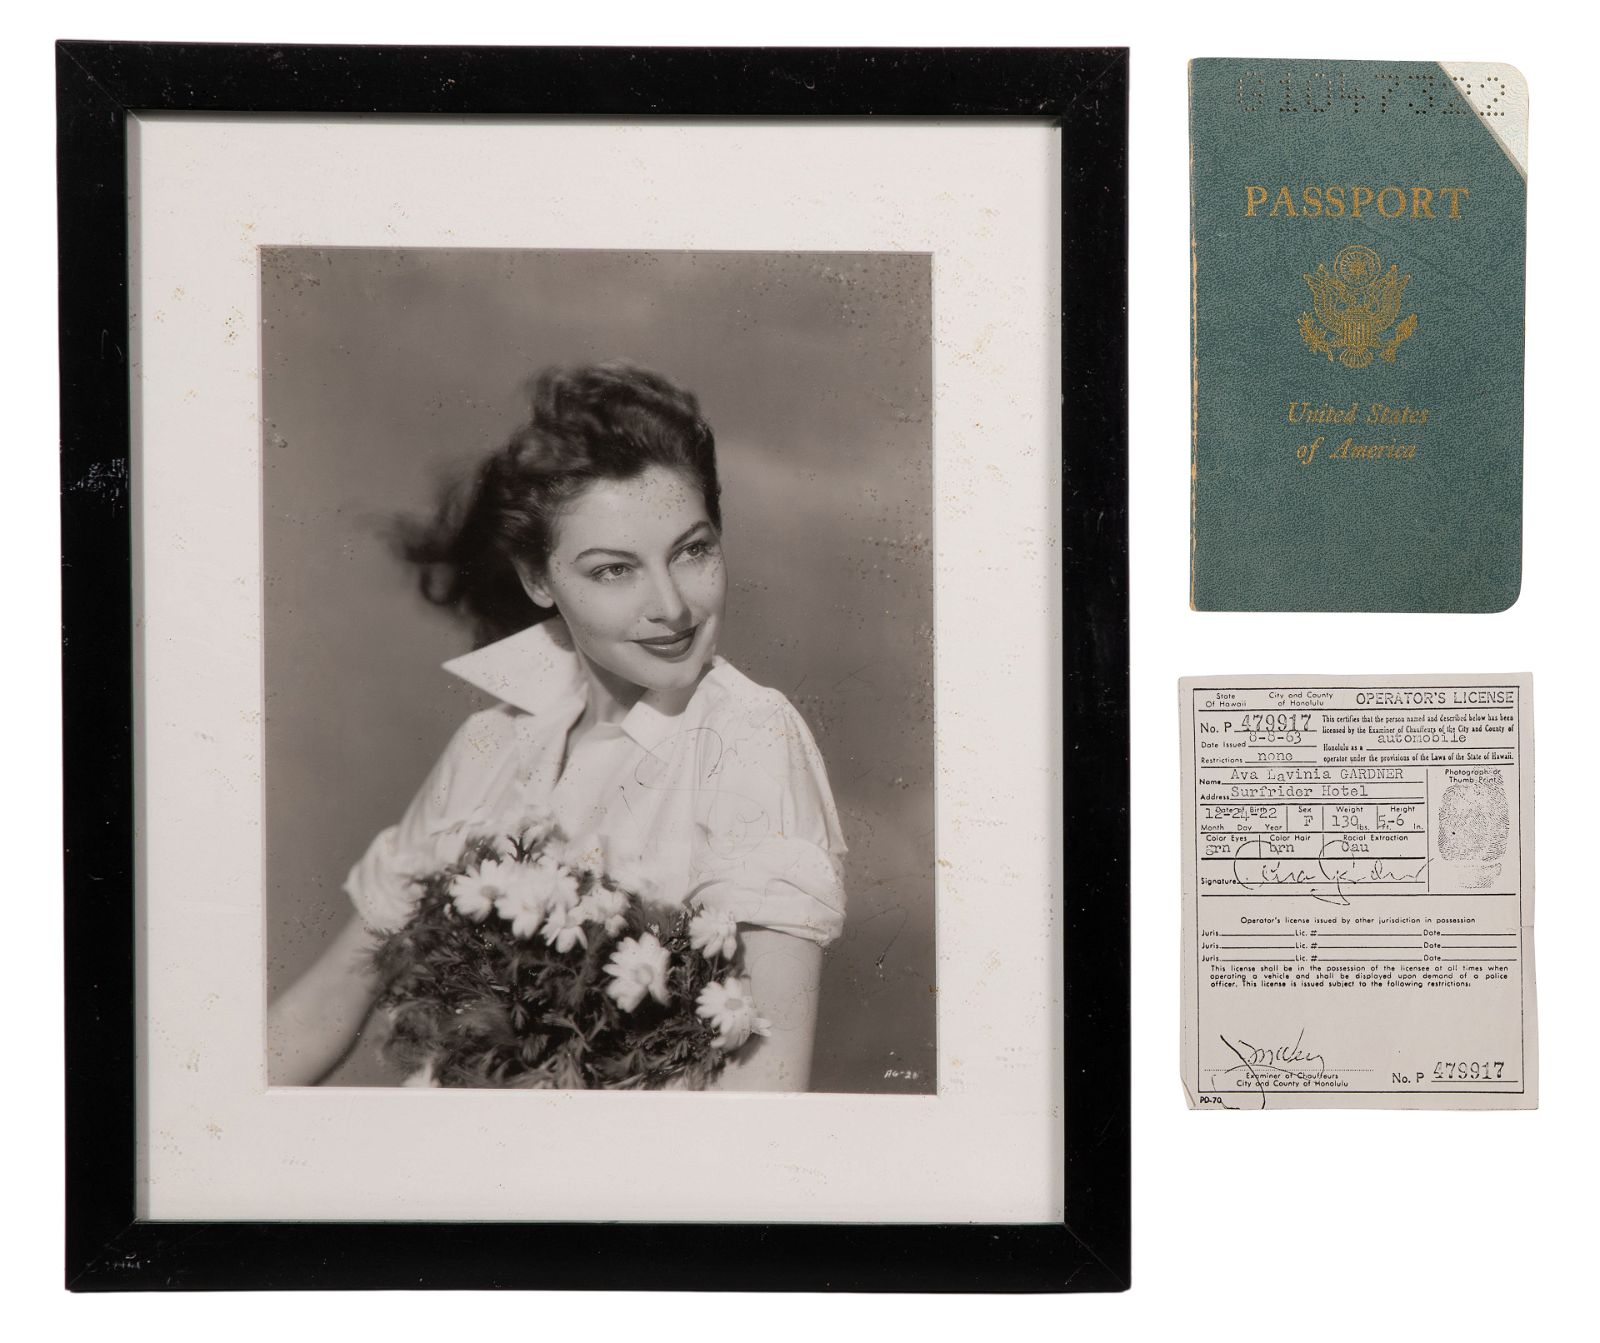 Ava Gardner’s passport, first issued in October 1966, estimated at $1,000-$1,500 at Leonard Auction.